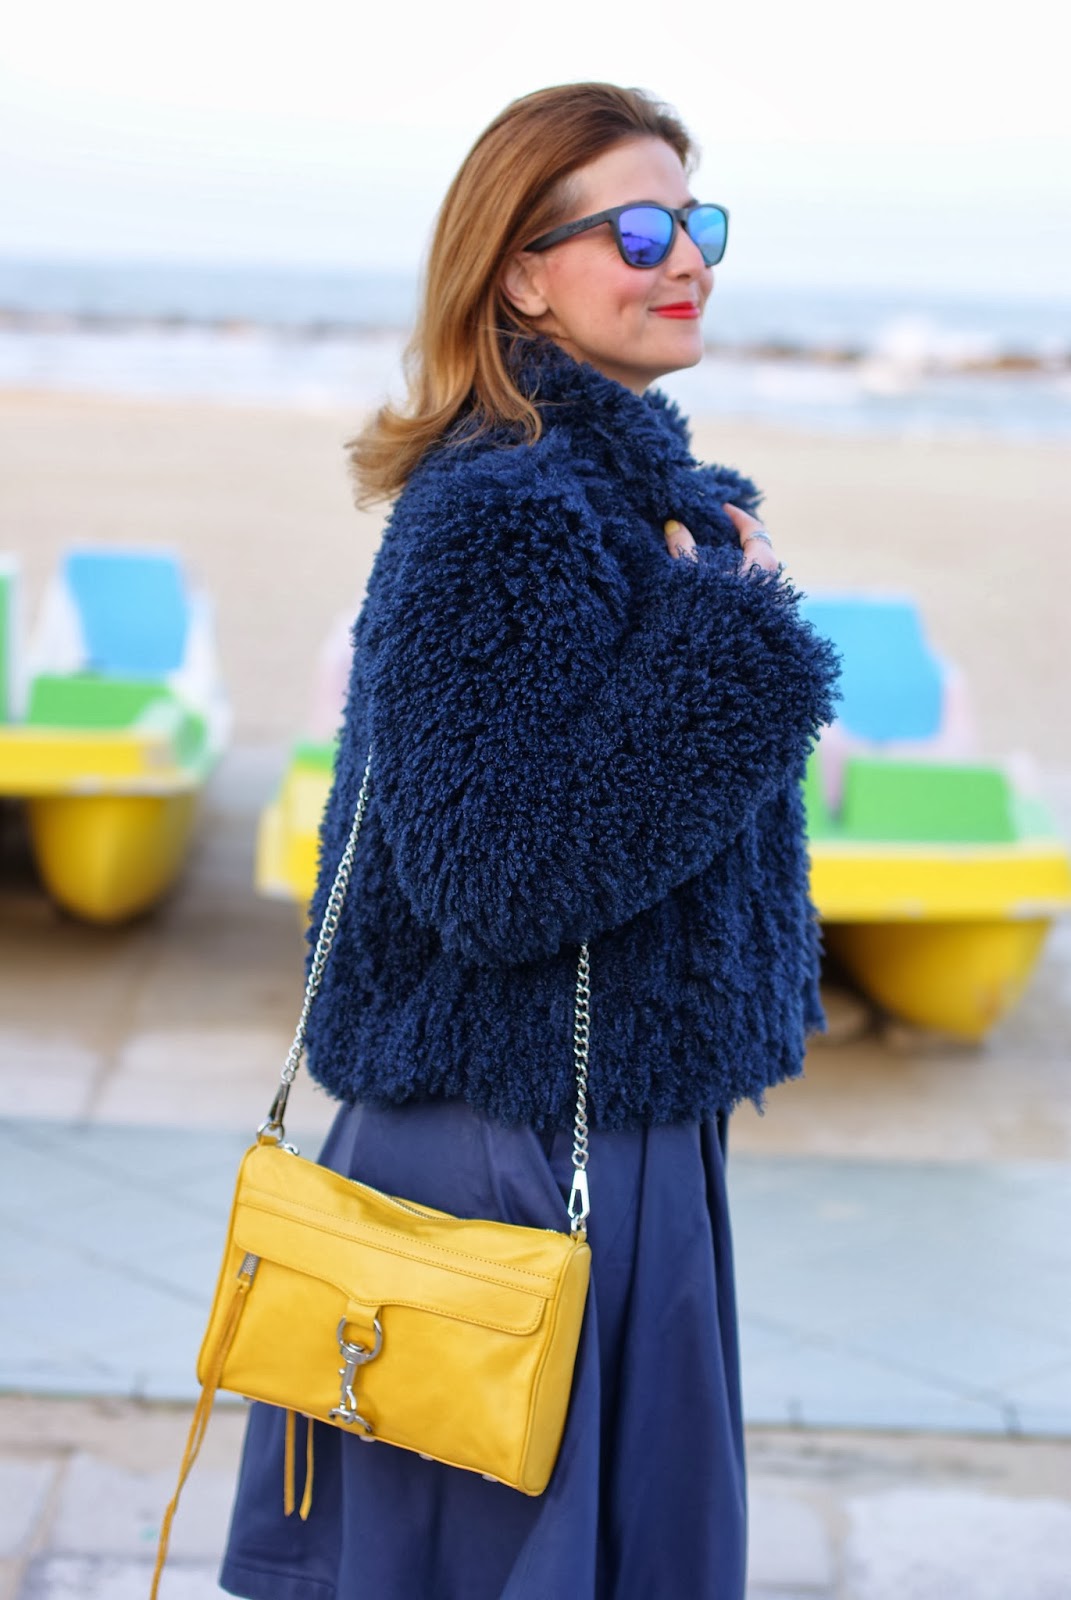 Blue faux fur jacket, yellow Rebecca Minkoff M.A.C. clutch, Fashion and Cookies, fashion blogger